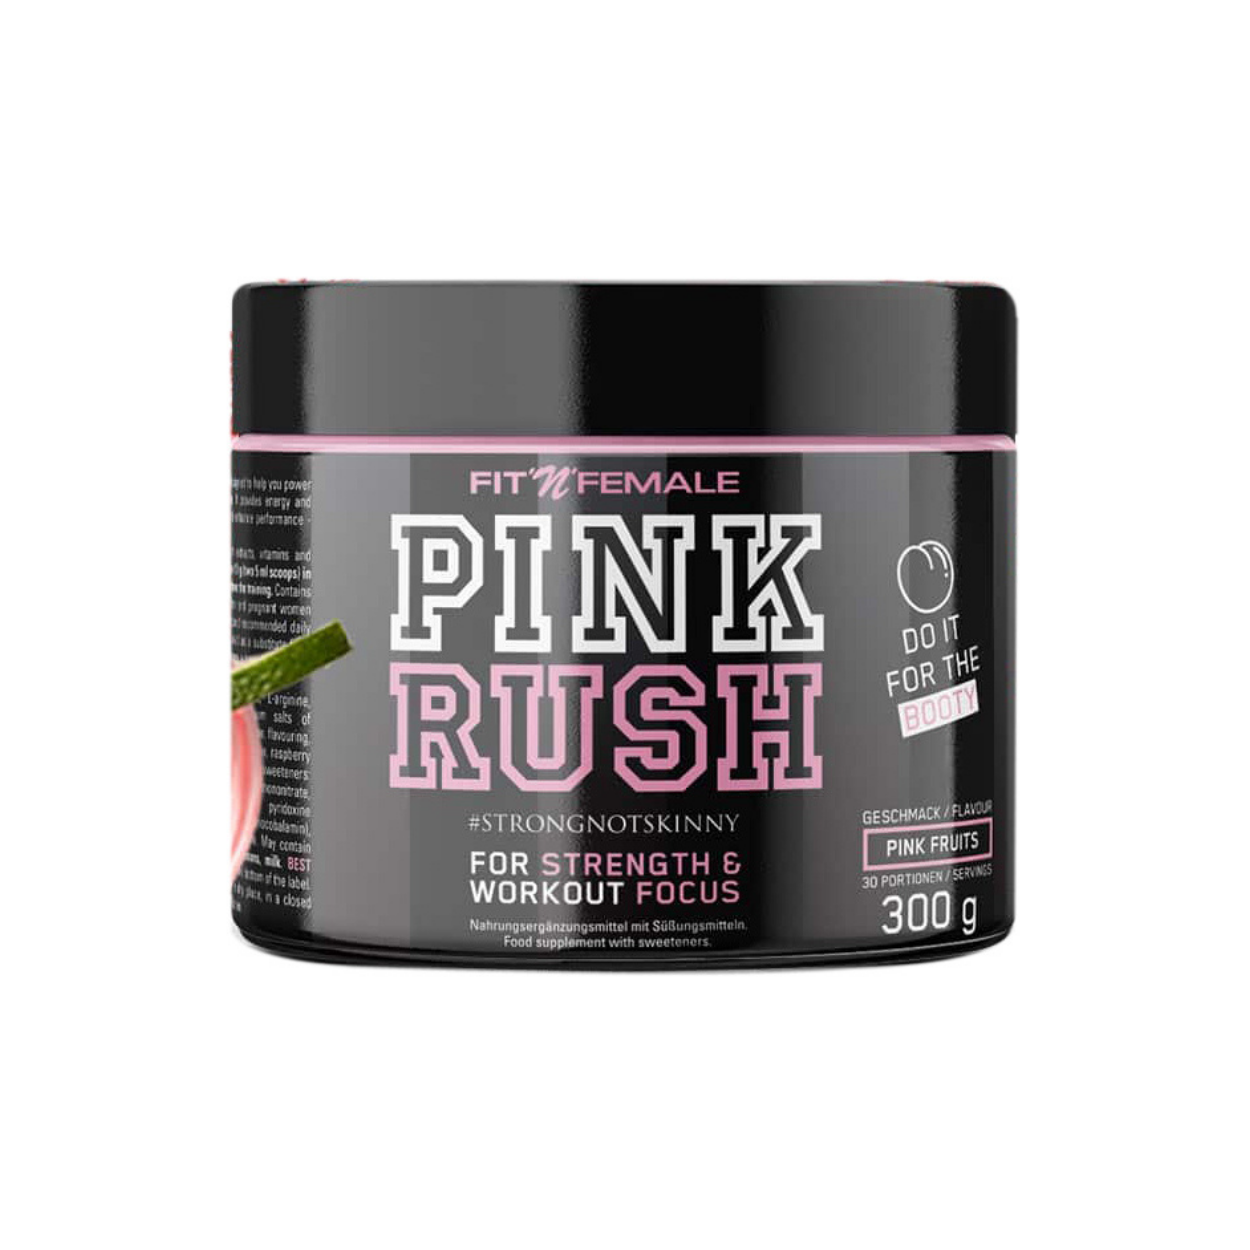 Fit n Female Pink Rush Muscle Tone Booster Pink Fruits (300g)